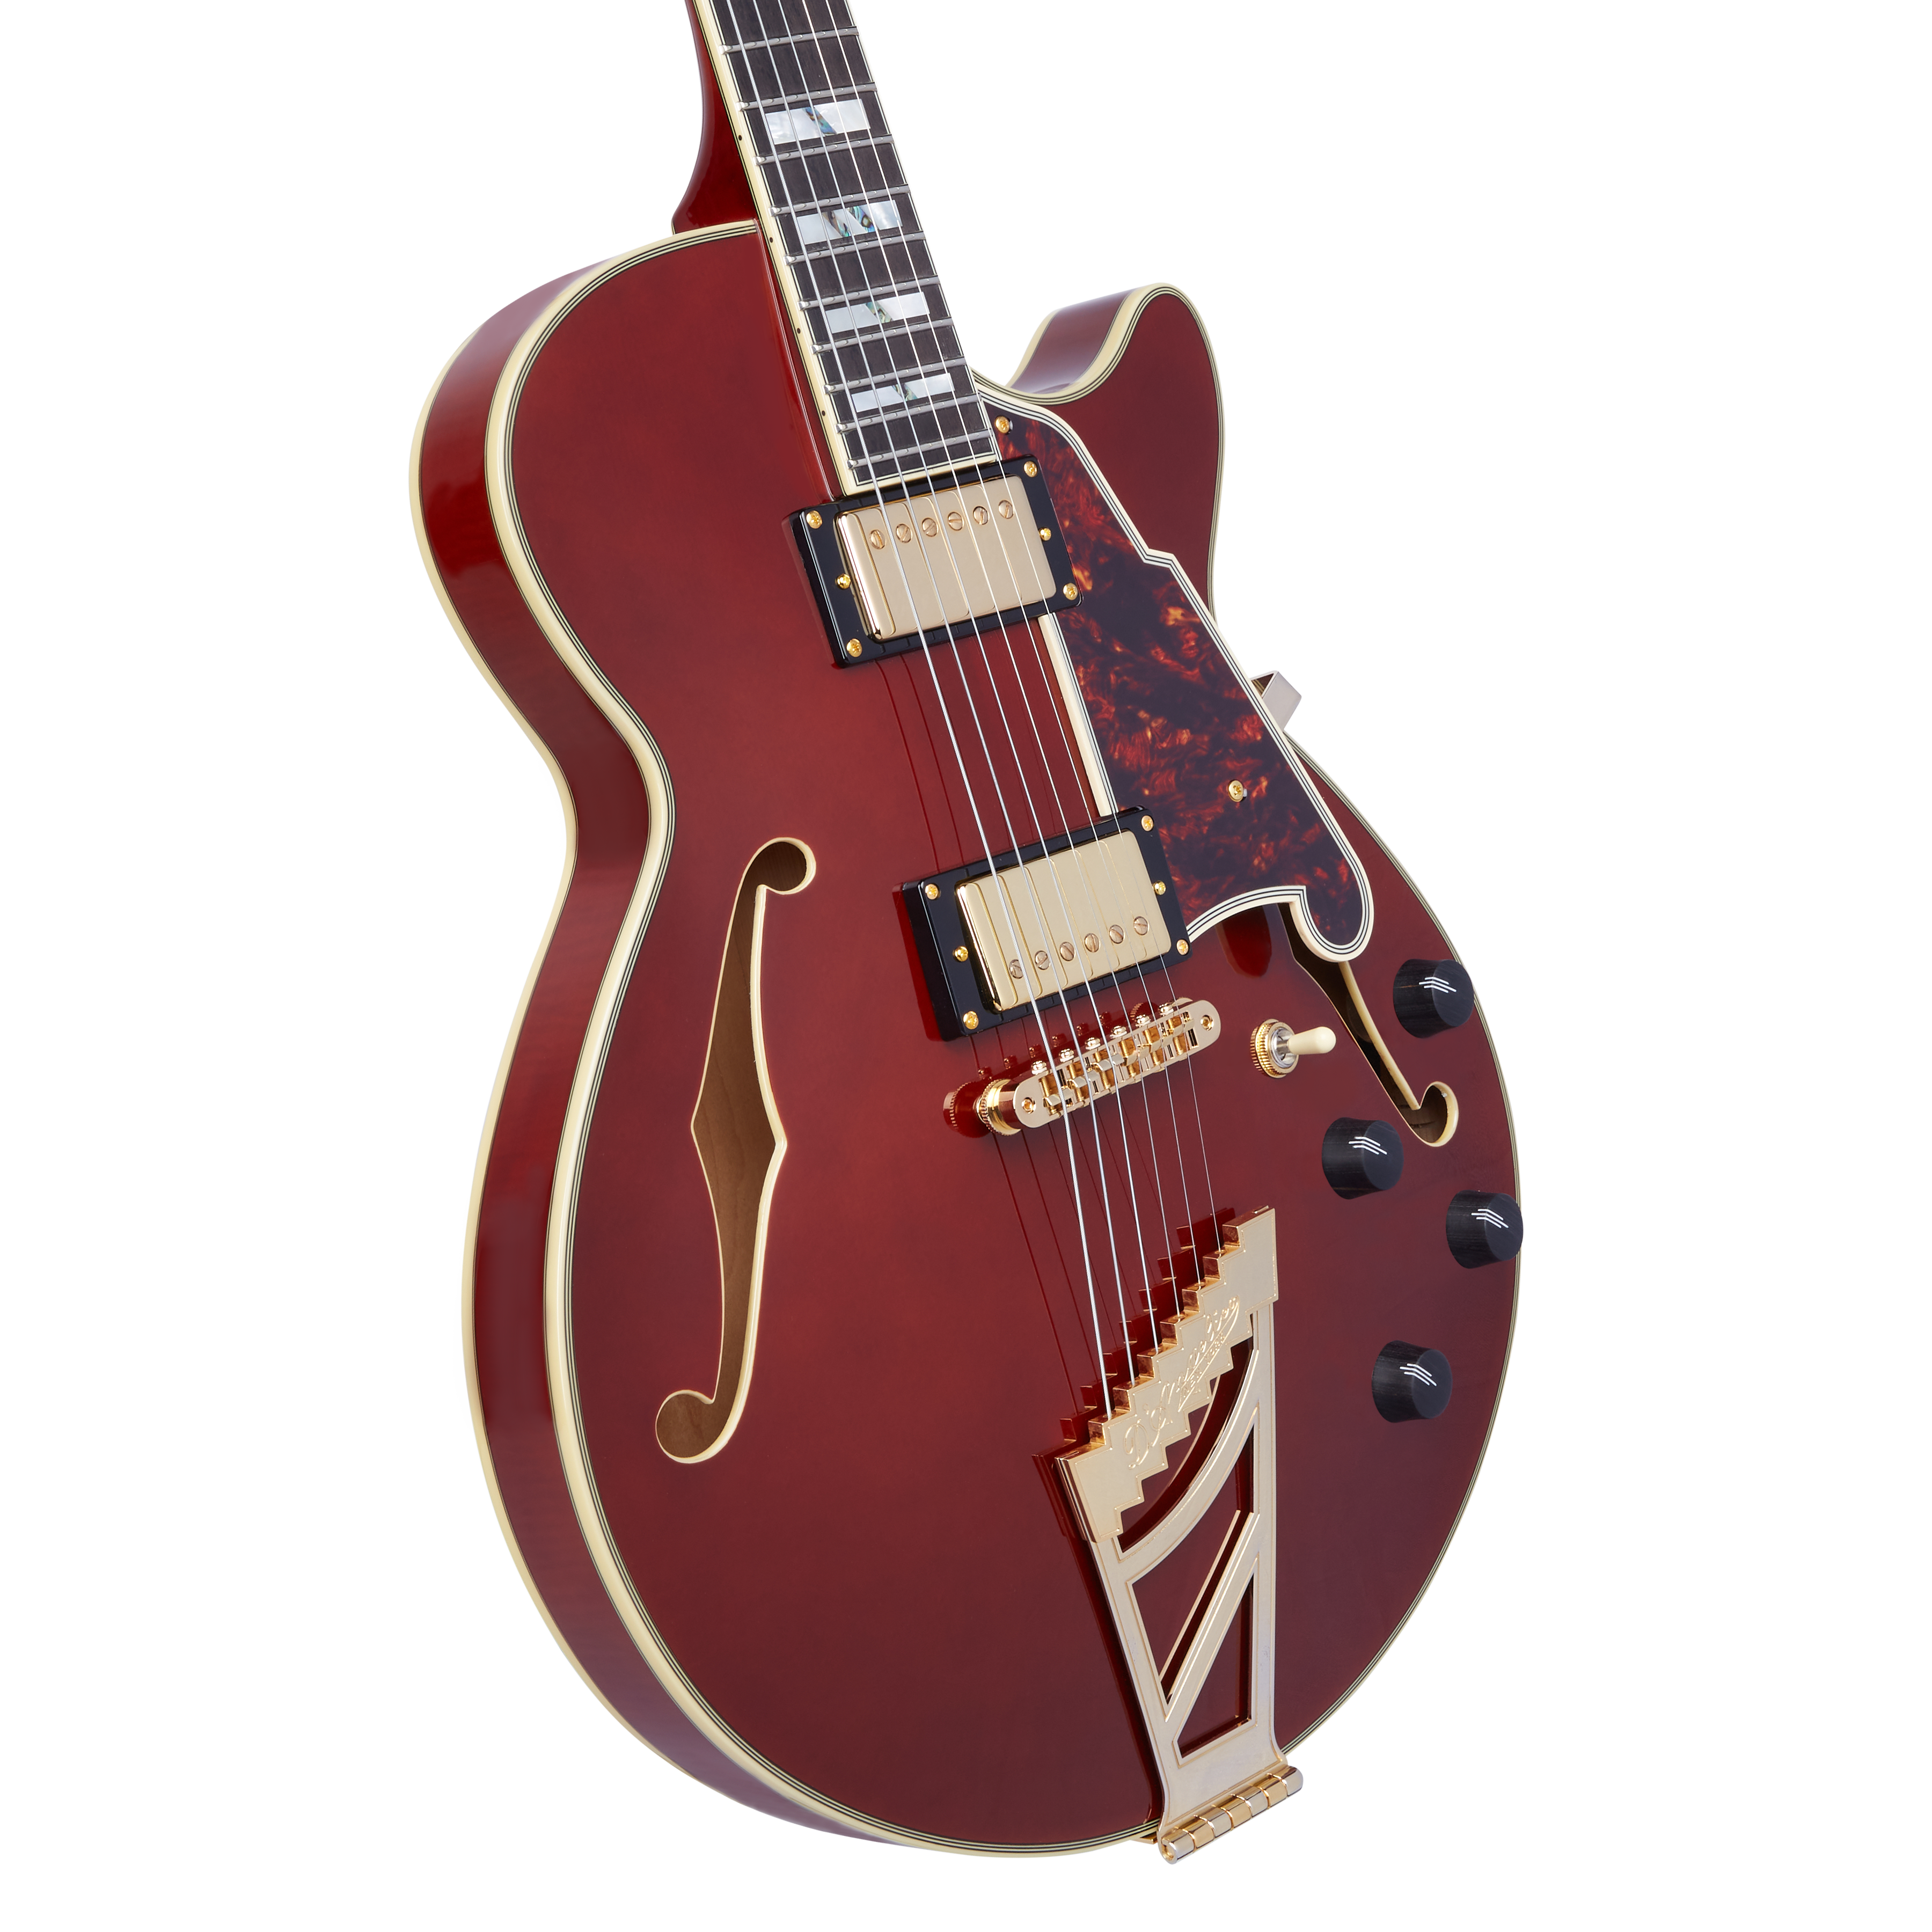 D'Angelico Excel SS Semi-hollowbody Electric Guitar With Stairstep Tailpiece, Viola DAESSVIOGT